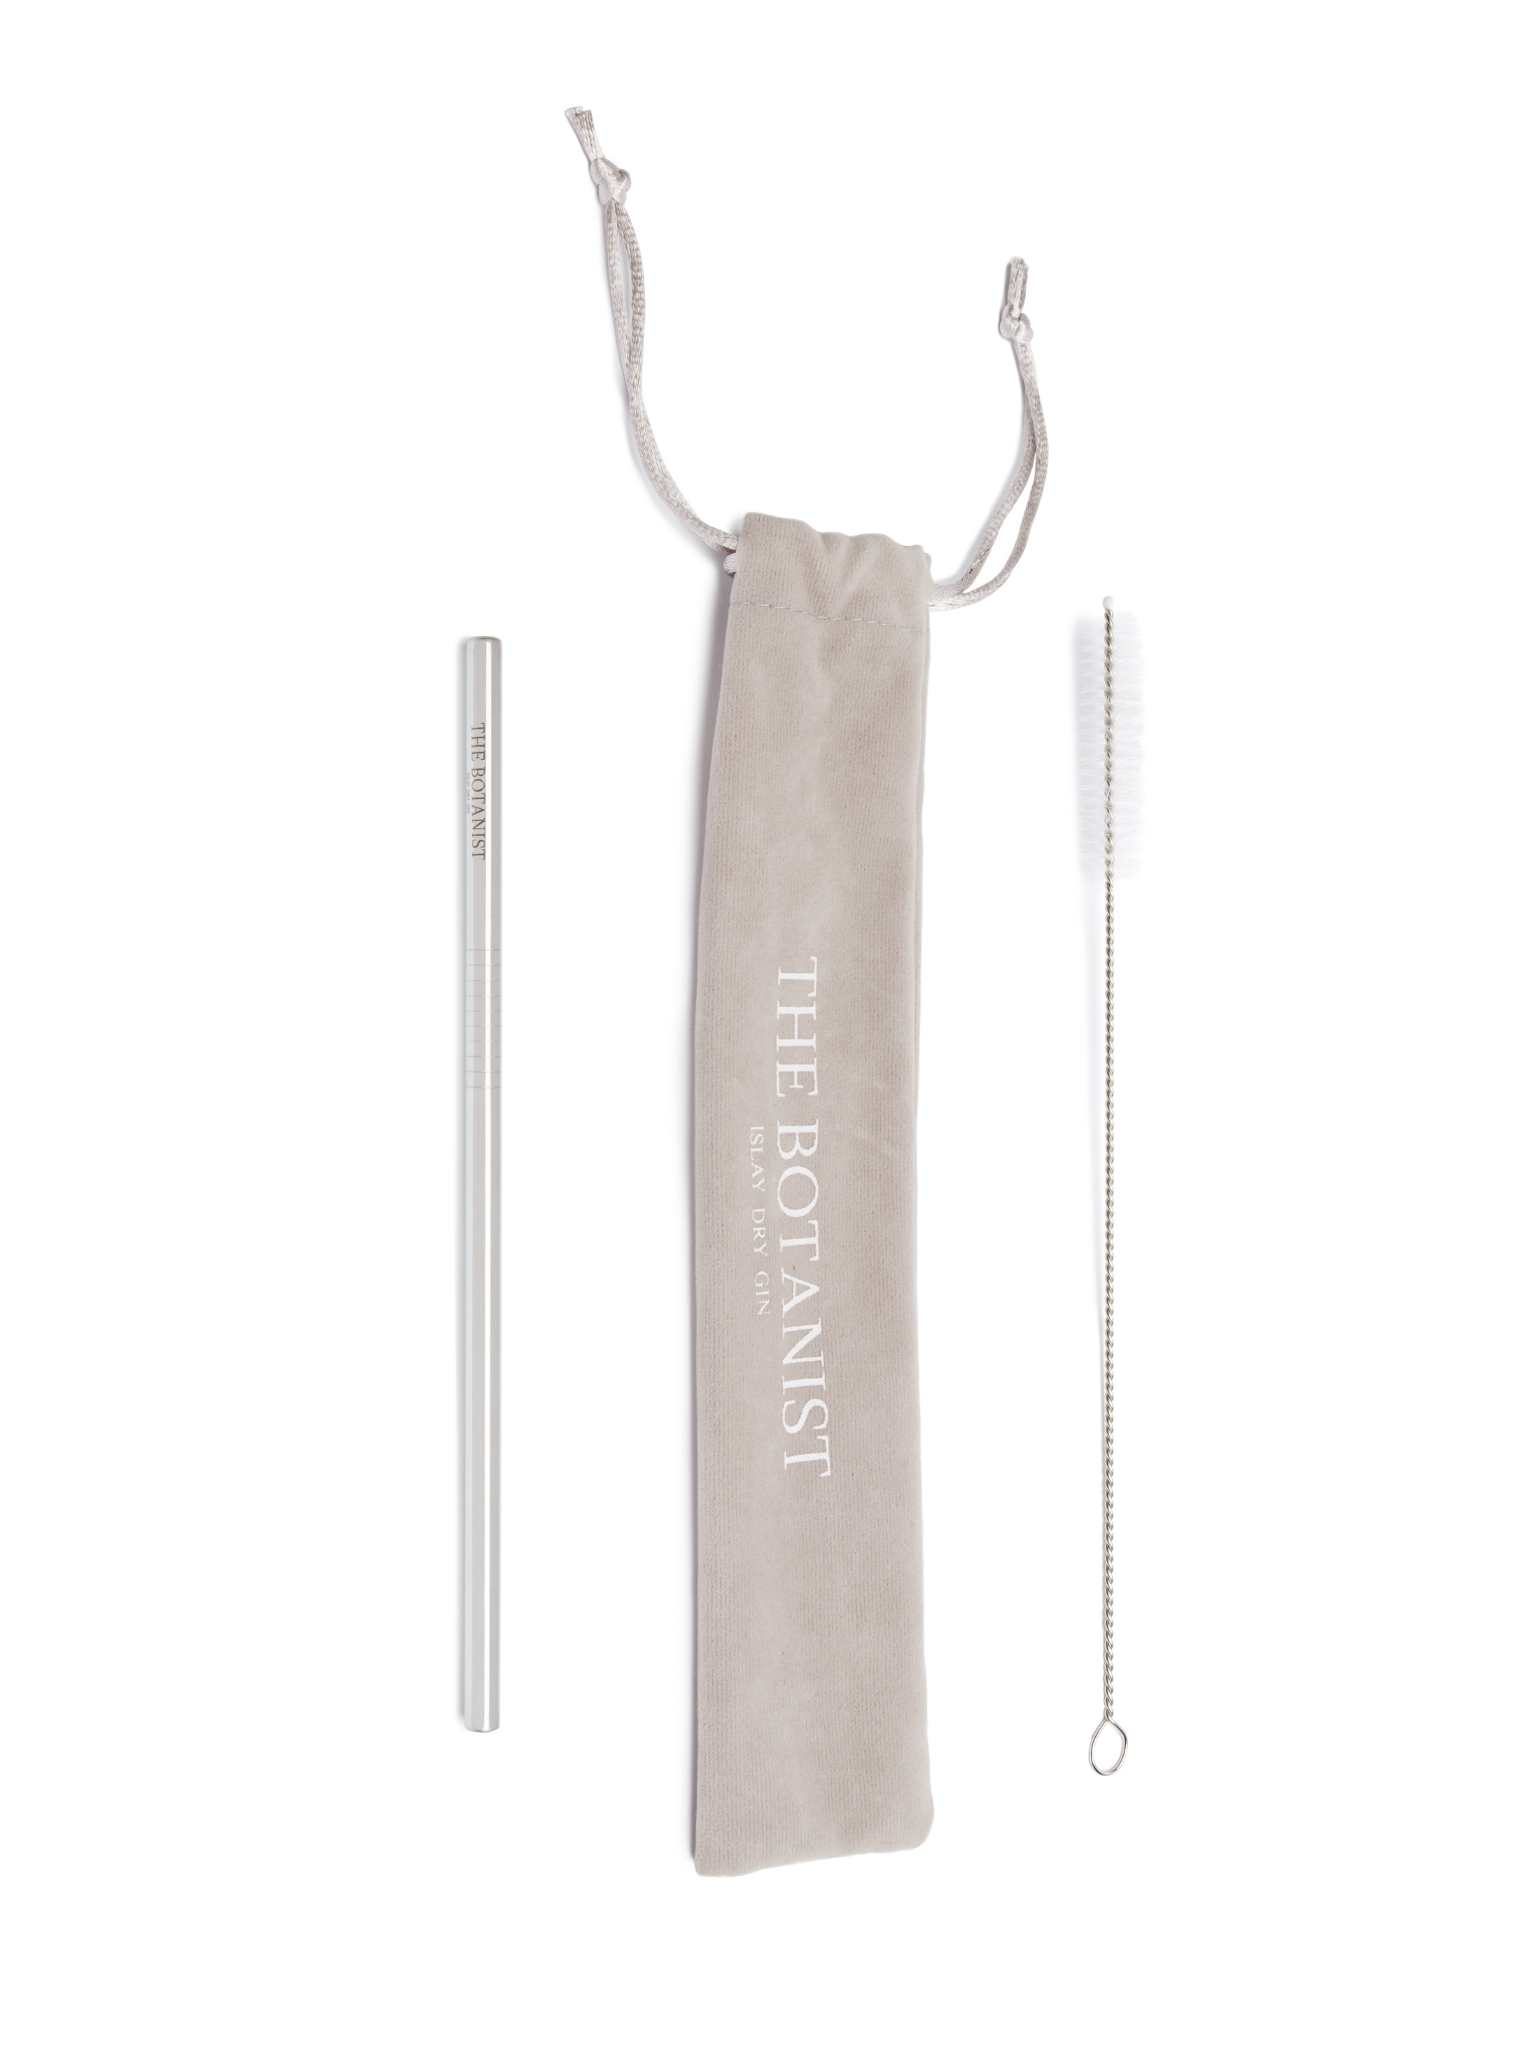 personalized reusable straw kit to offer